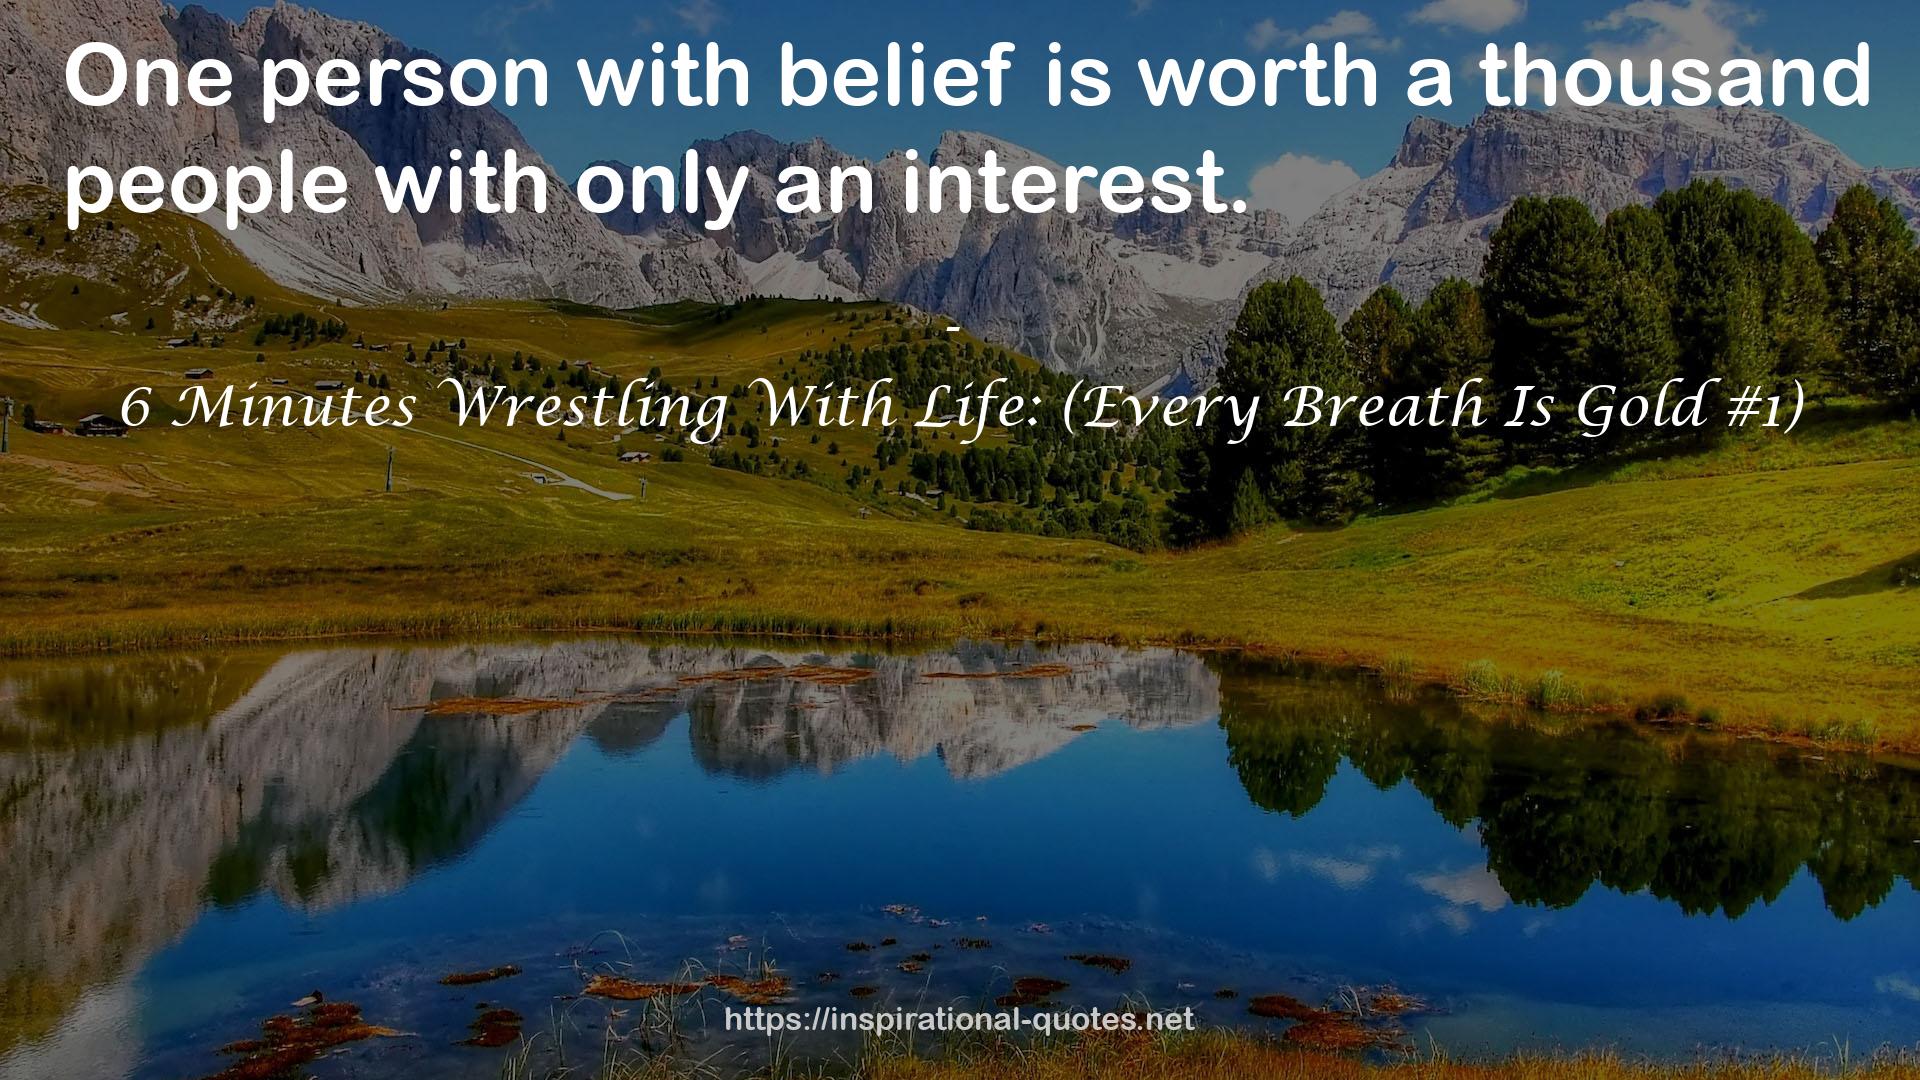 6 Minutes Wrestling With Life: (Every Breath Is Gold #1) QUOTES